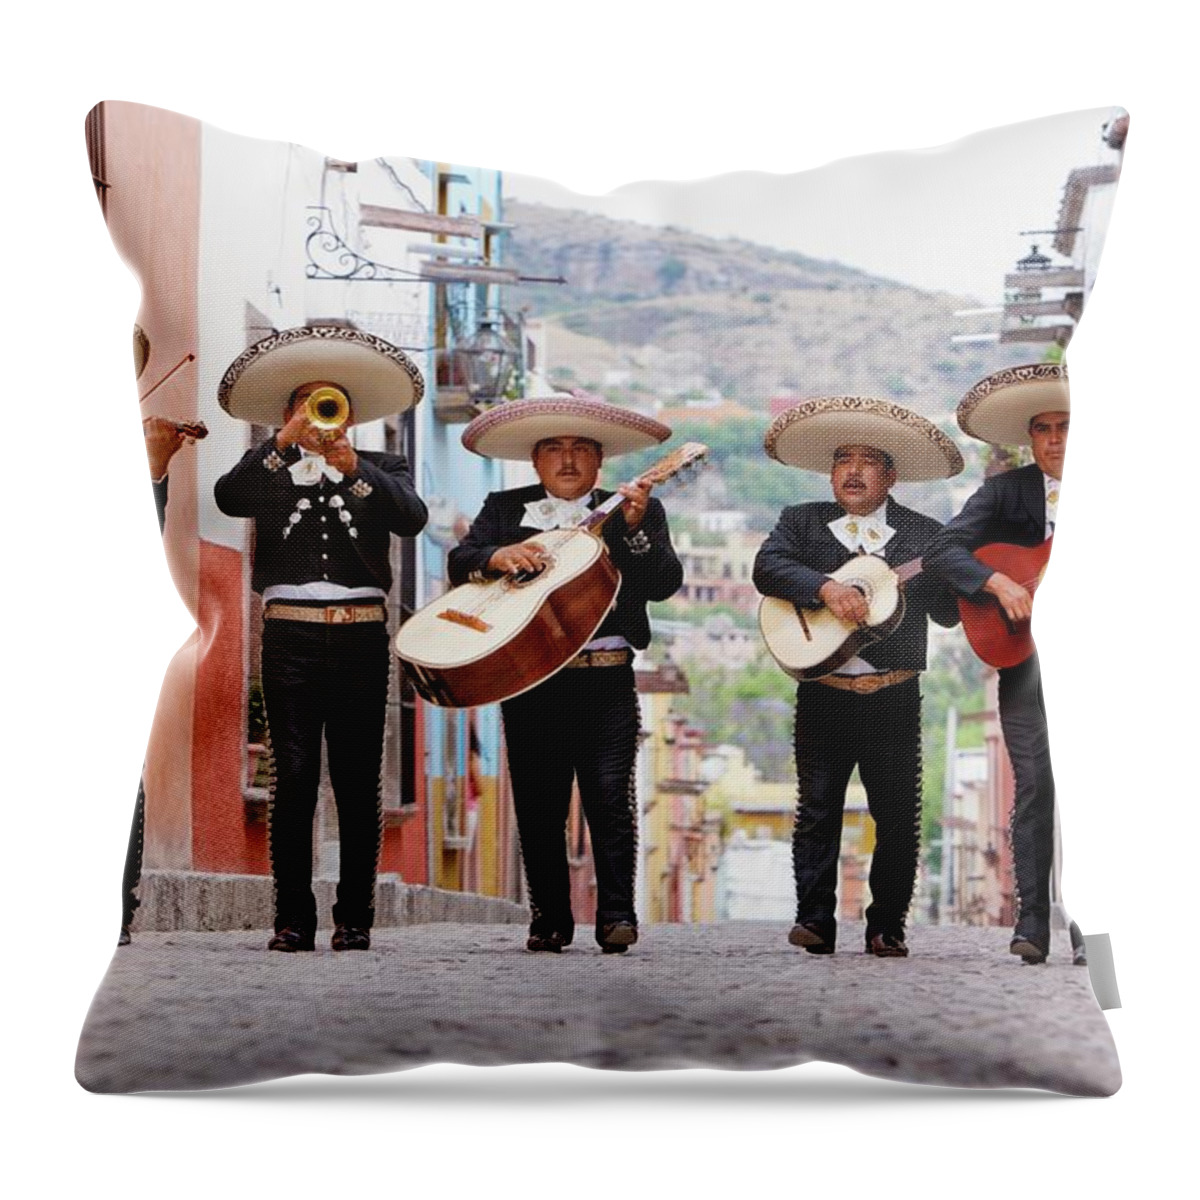 Mature Adult Throw Pillow featuring the photograph Mariachi Band Walking In Street by Pixelchrome Inc